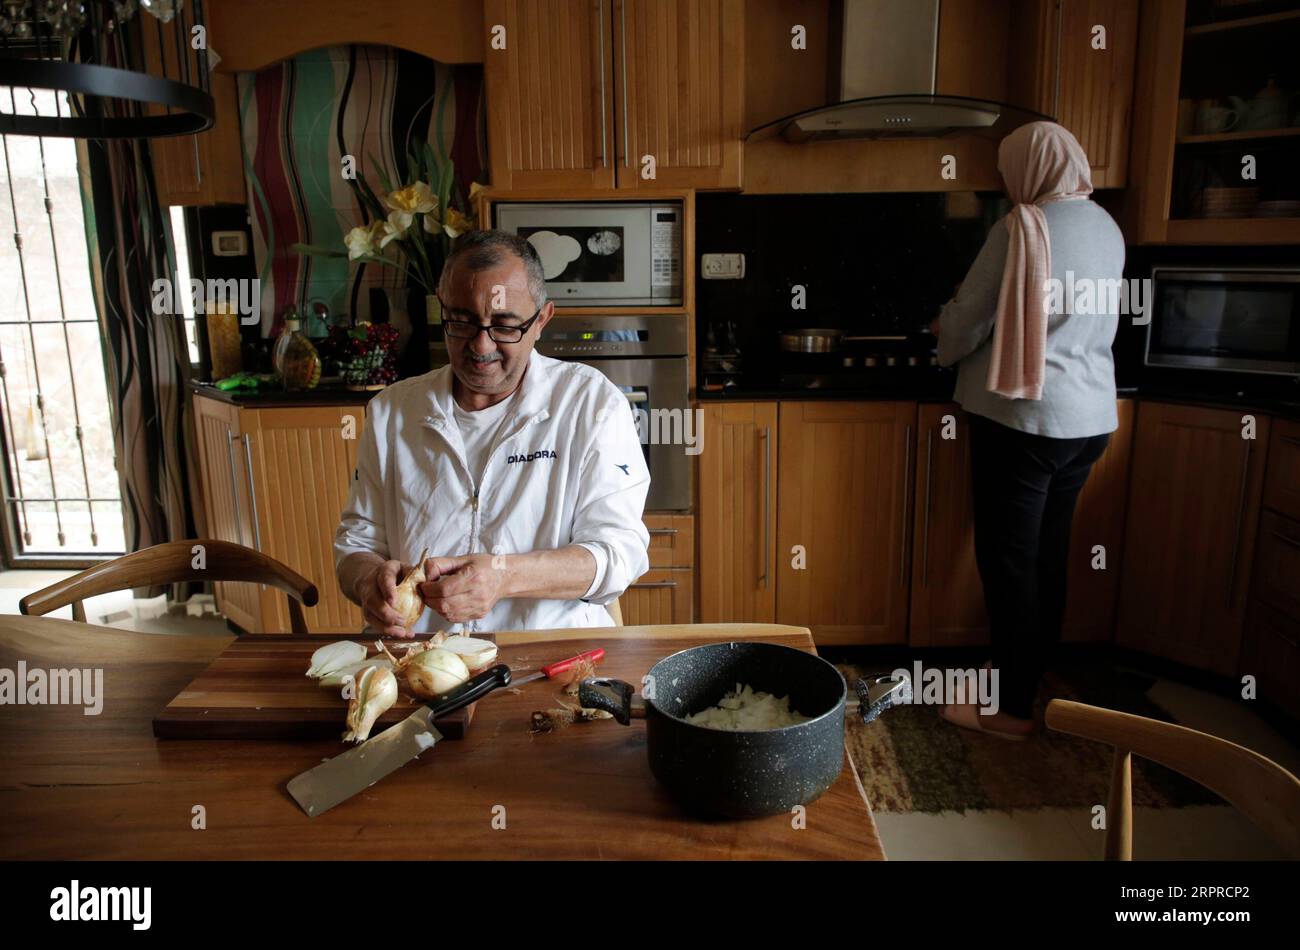 200401) -- NABLUS, April 1, 2020 (Xinhua) -- Palestinian chef Hasan Titi,  56, helps his wife Samar Titi in cooking and preparing homemade meal inside  their house kitchen in the West Bank